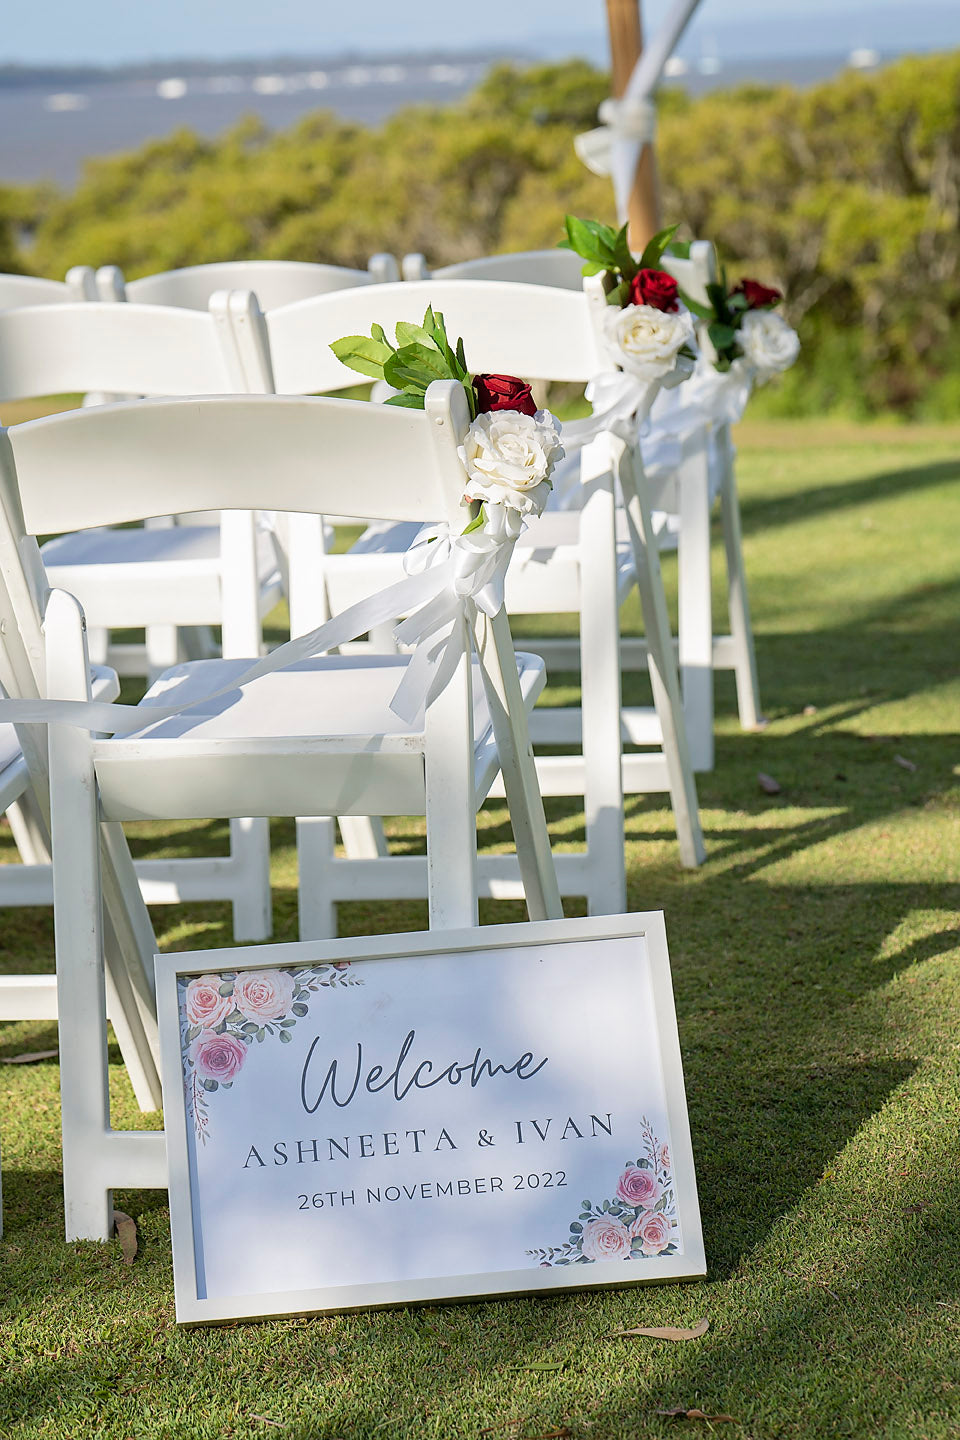 Golf Club Bay View Ceremony - Any day of the week